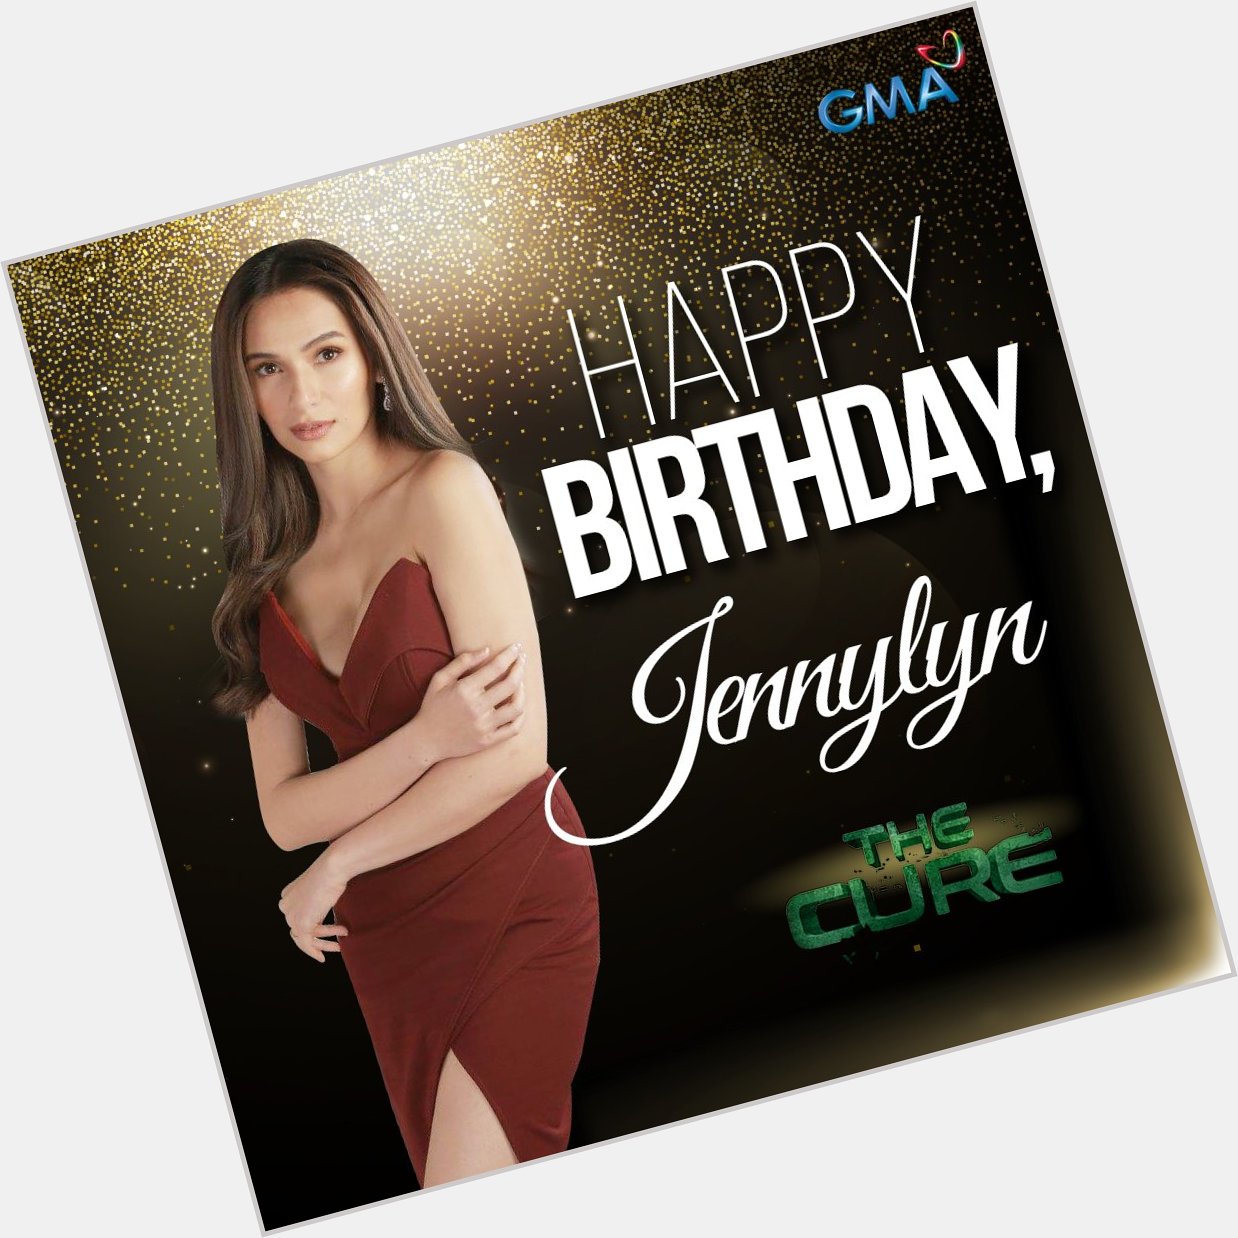 Happy Birthday to \s very own Charity, Jennylyn Mercado! We wish you all the best in life! 